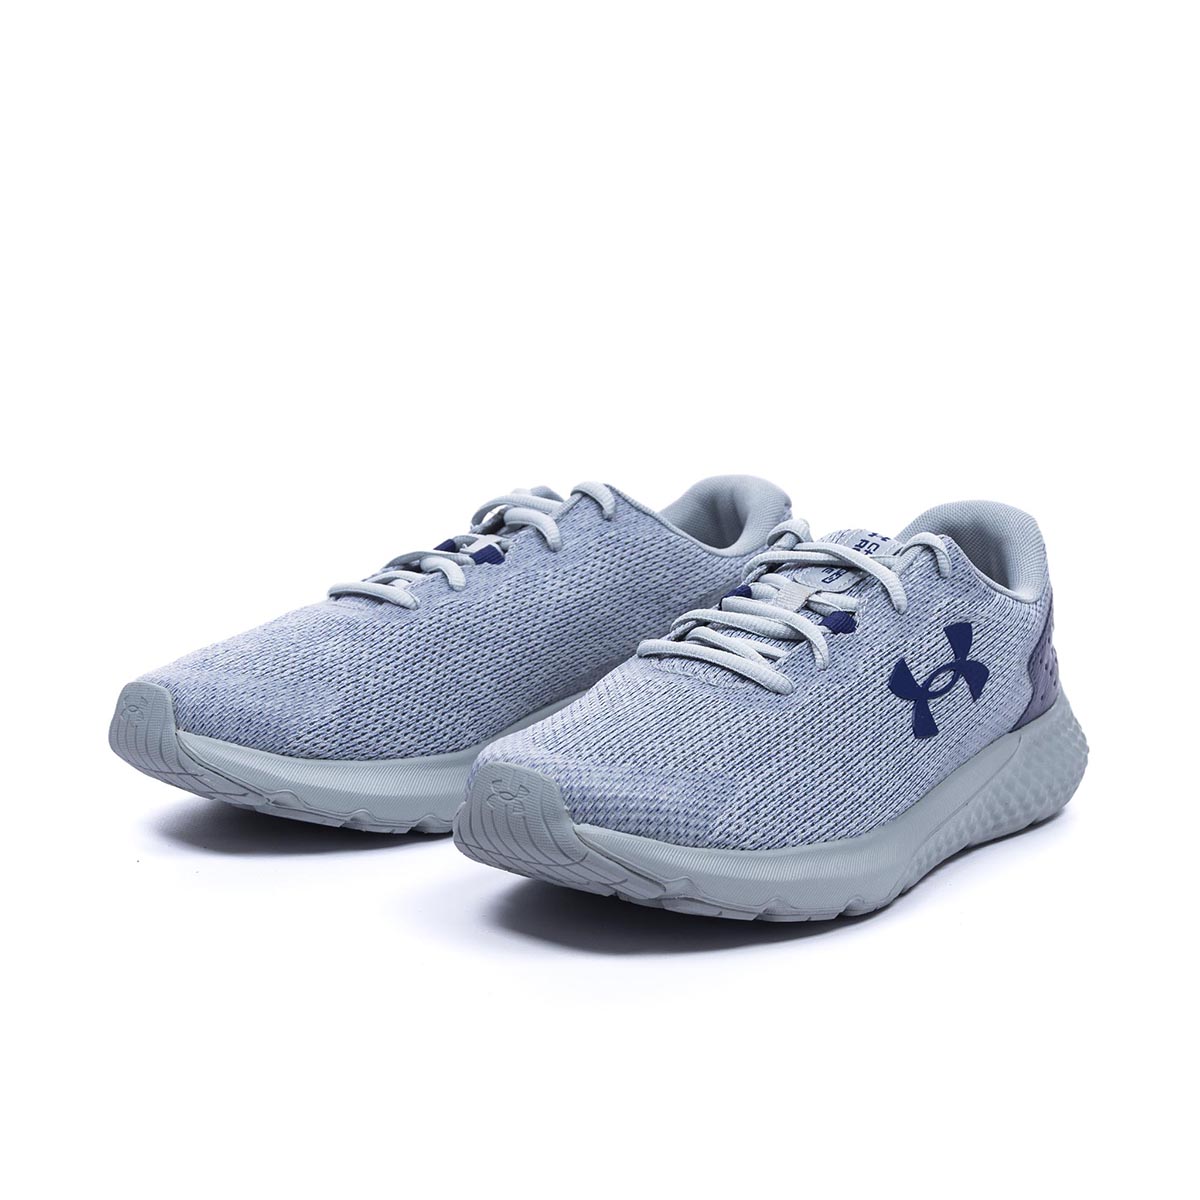 UNDER ARMOUR - CHARGED ROGUE 3 KNIT